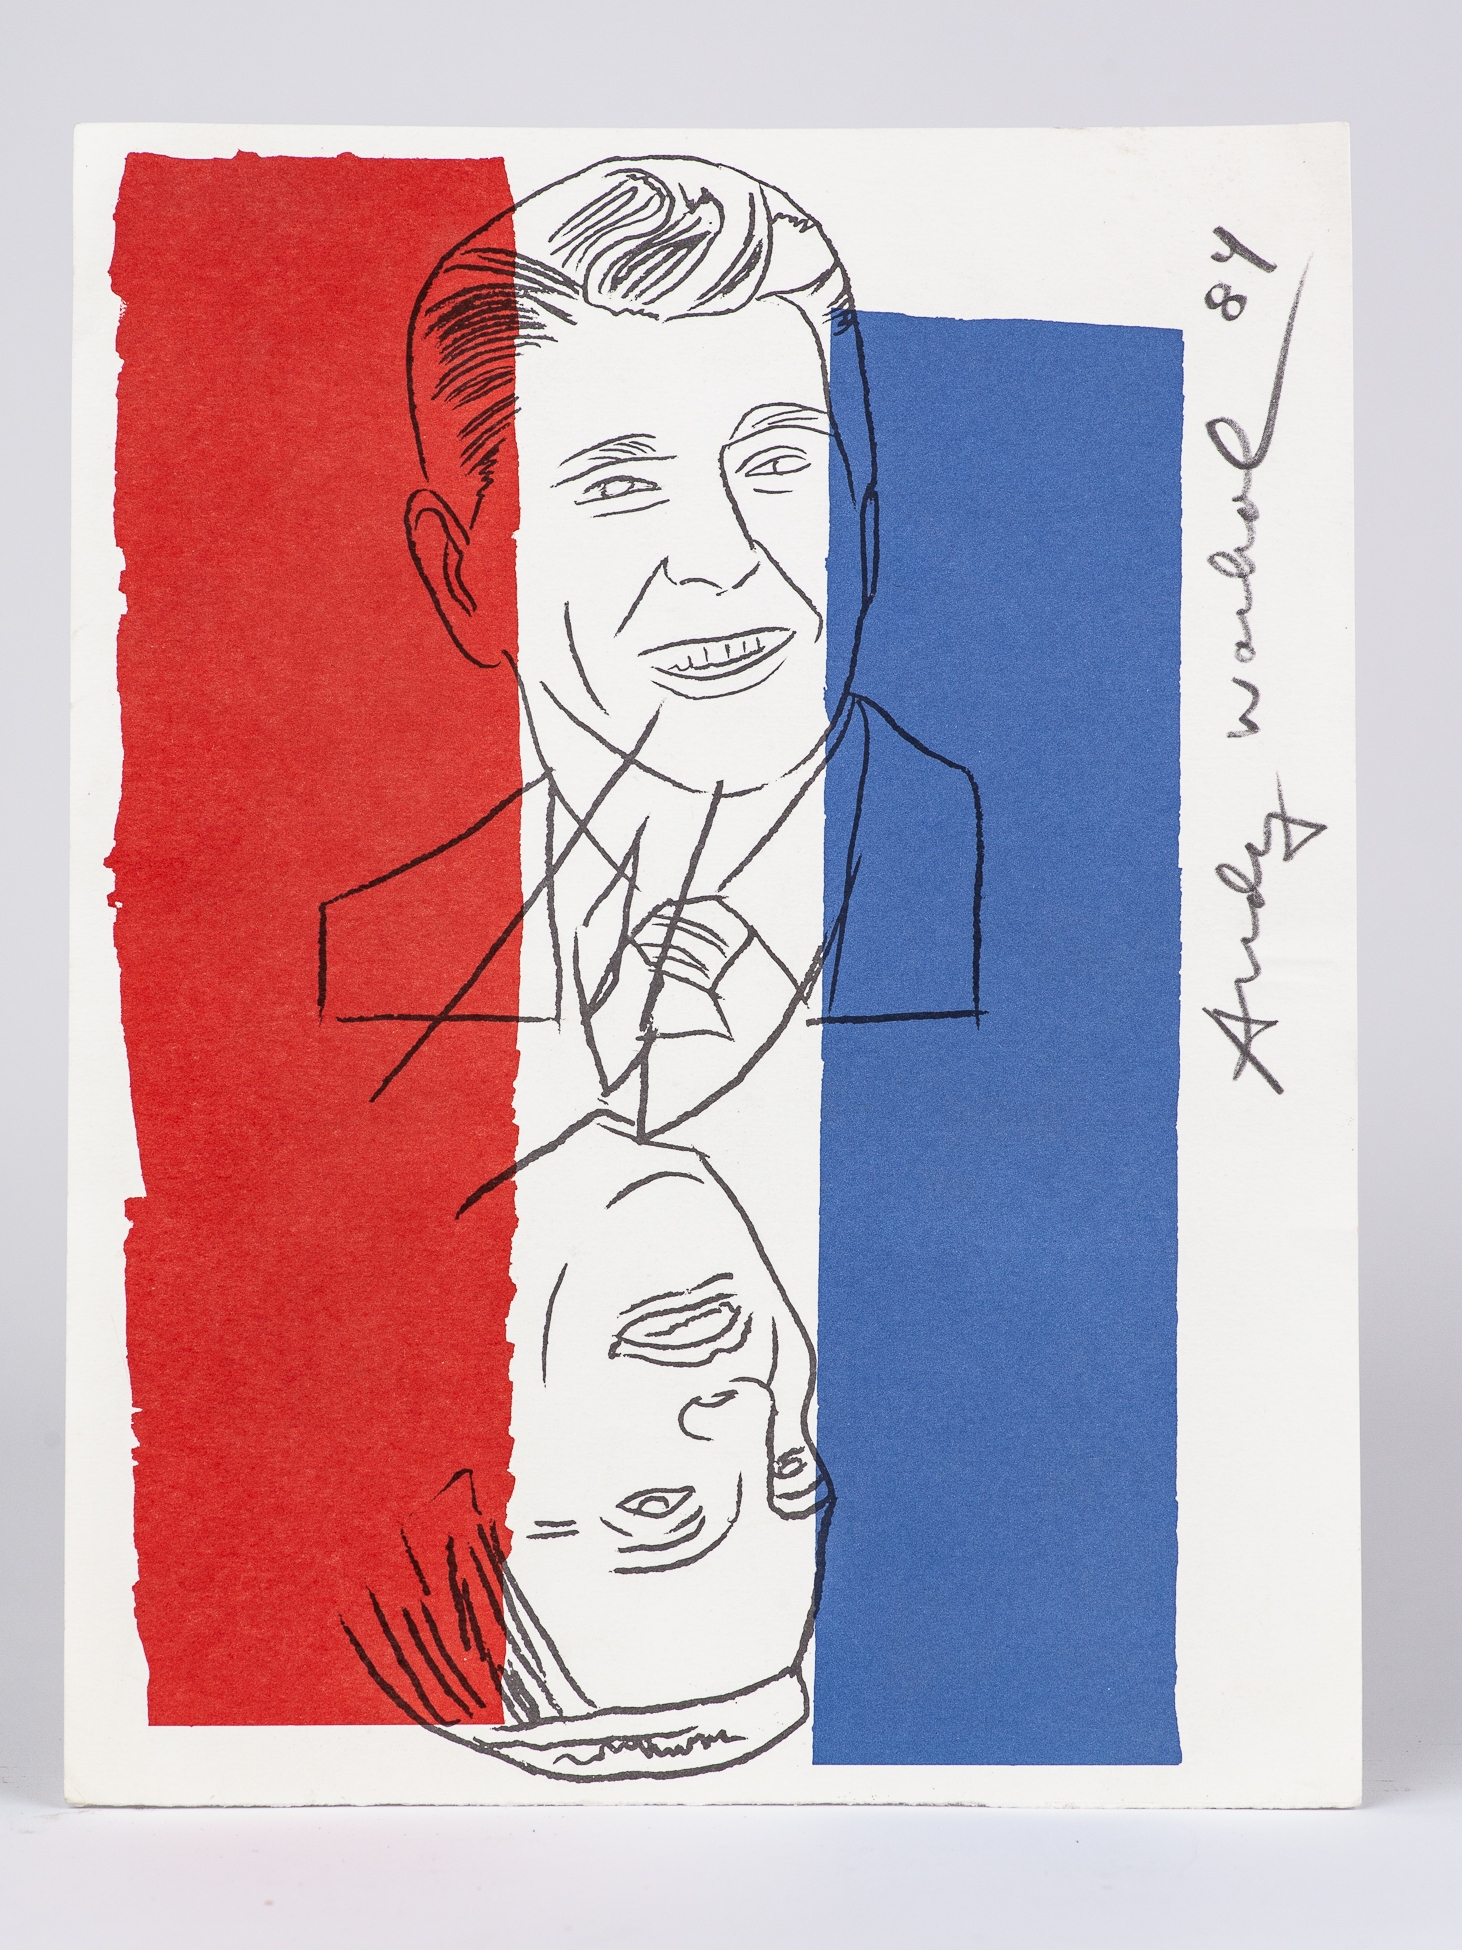 Invitation (Election Night 1984) by Andy Warhol, 1984